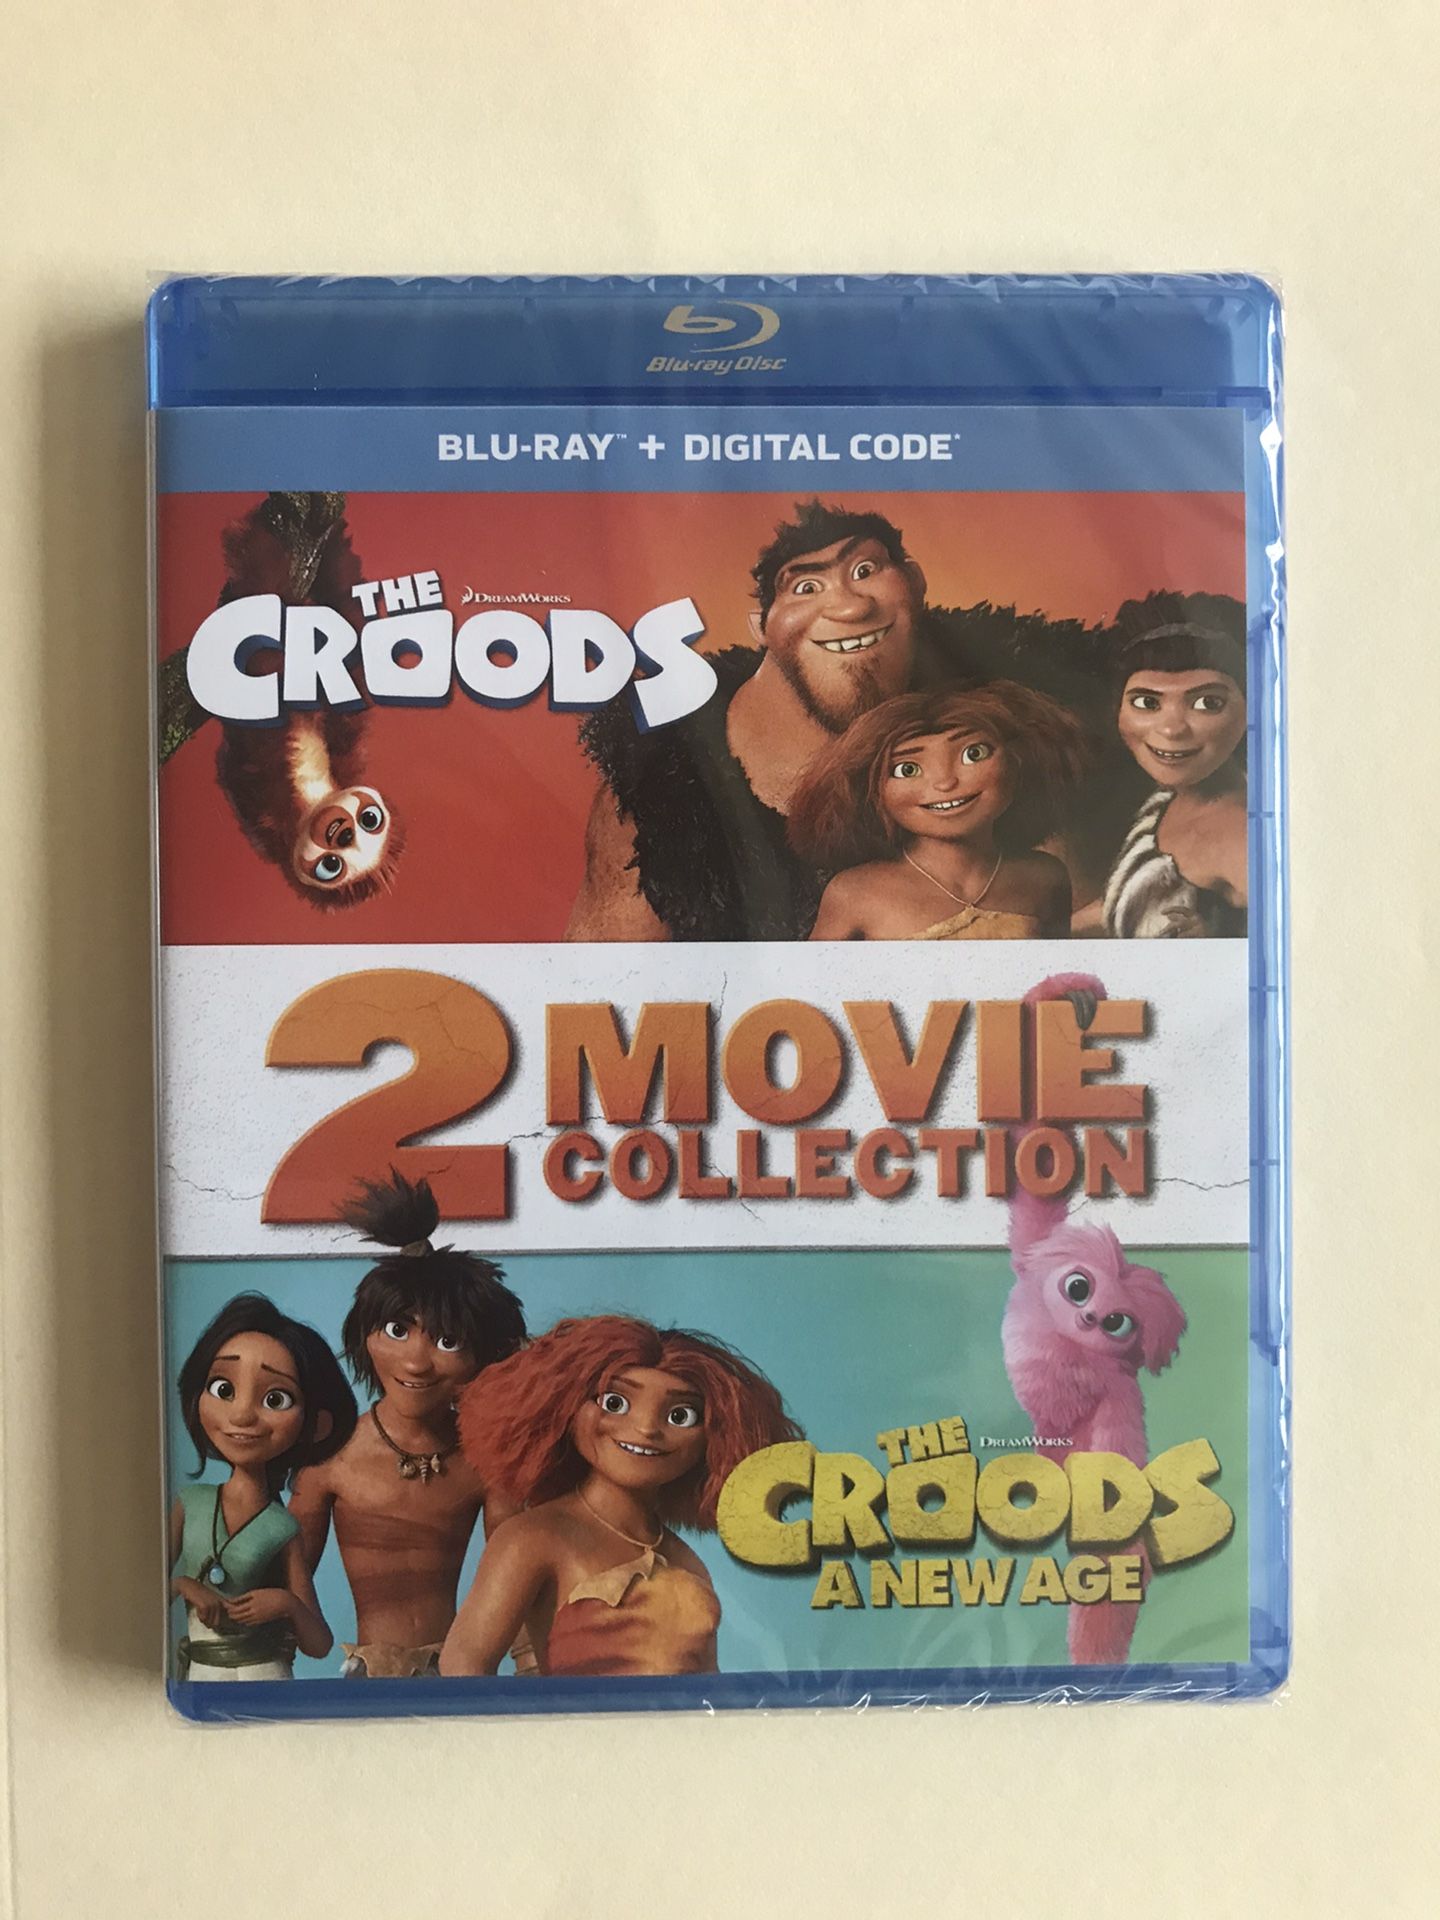 The Croods 1 and 2 Blu-ray, Disney Marvel DC Harry Potter the Star Wars movies 3D Bluray and dvd collectors